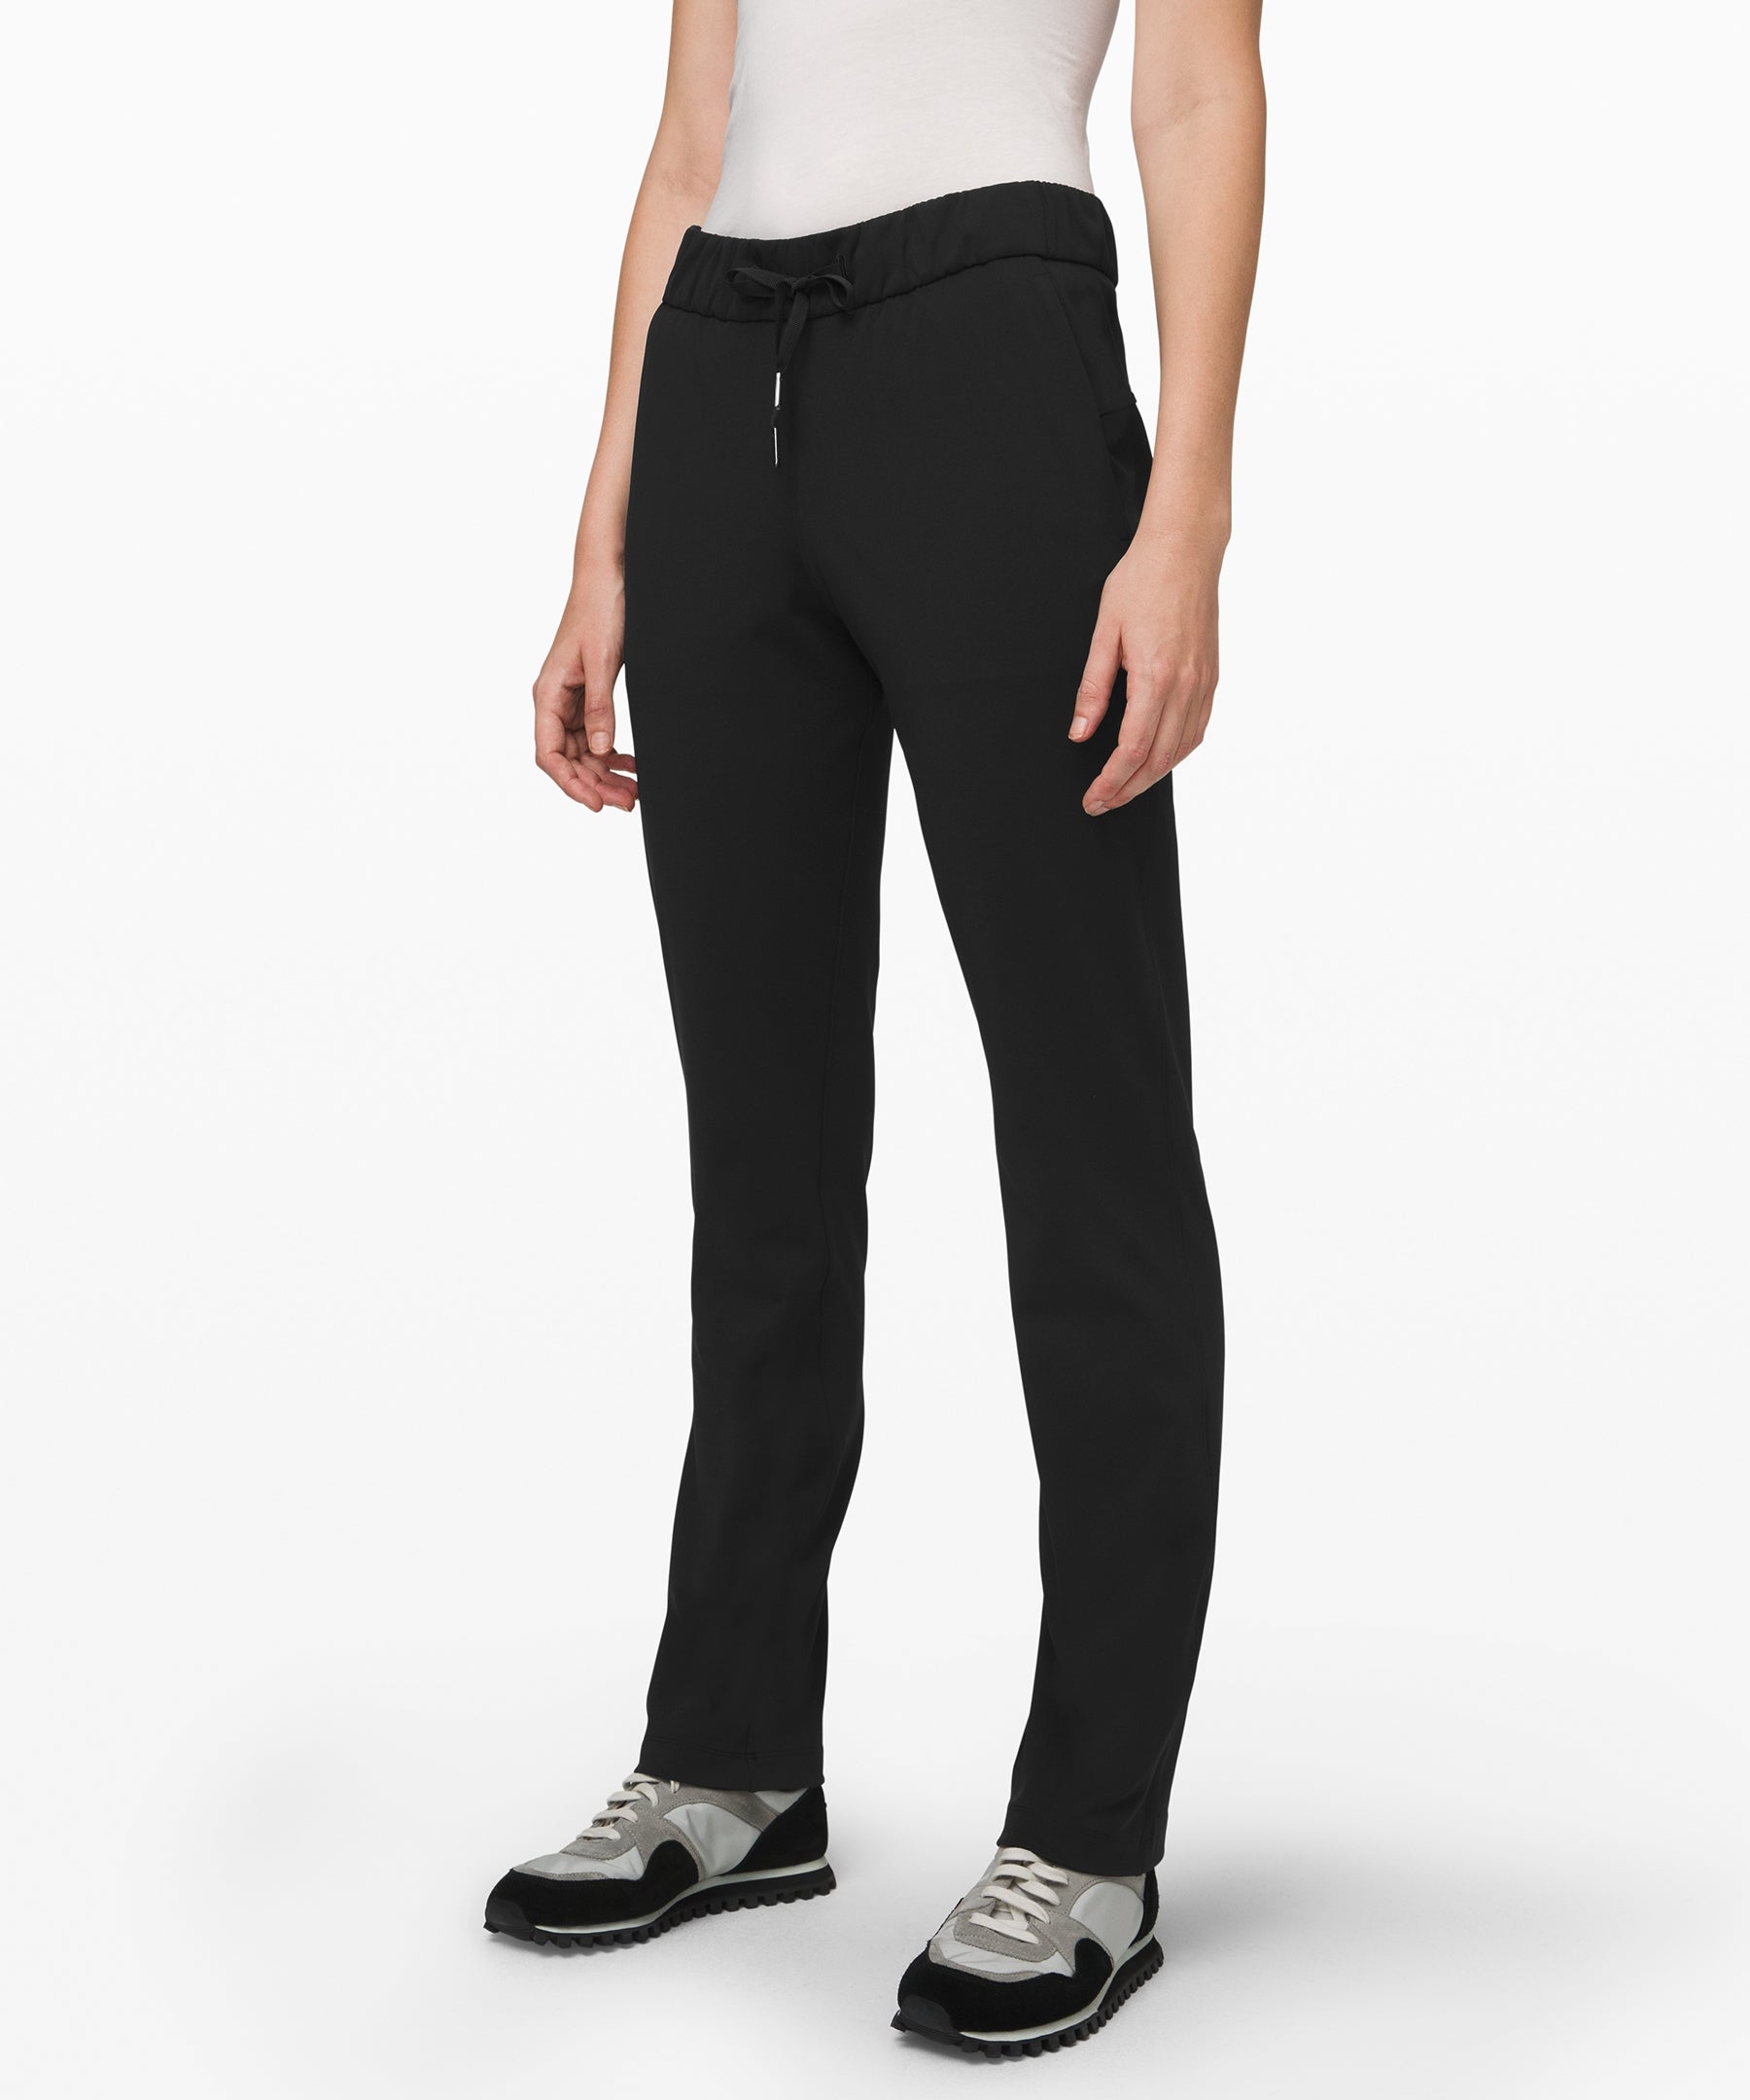 On The Fly Pants Lululemon Review